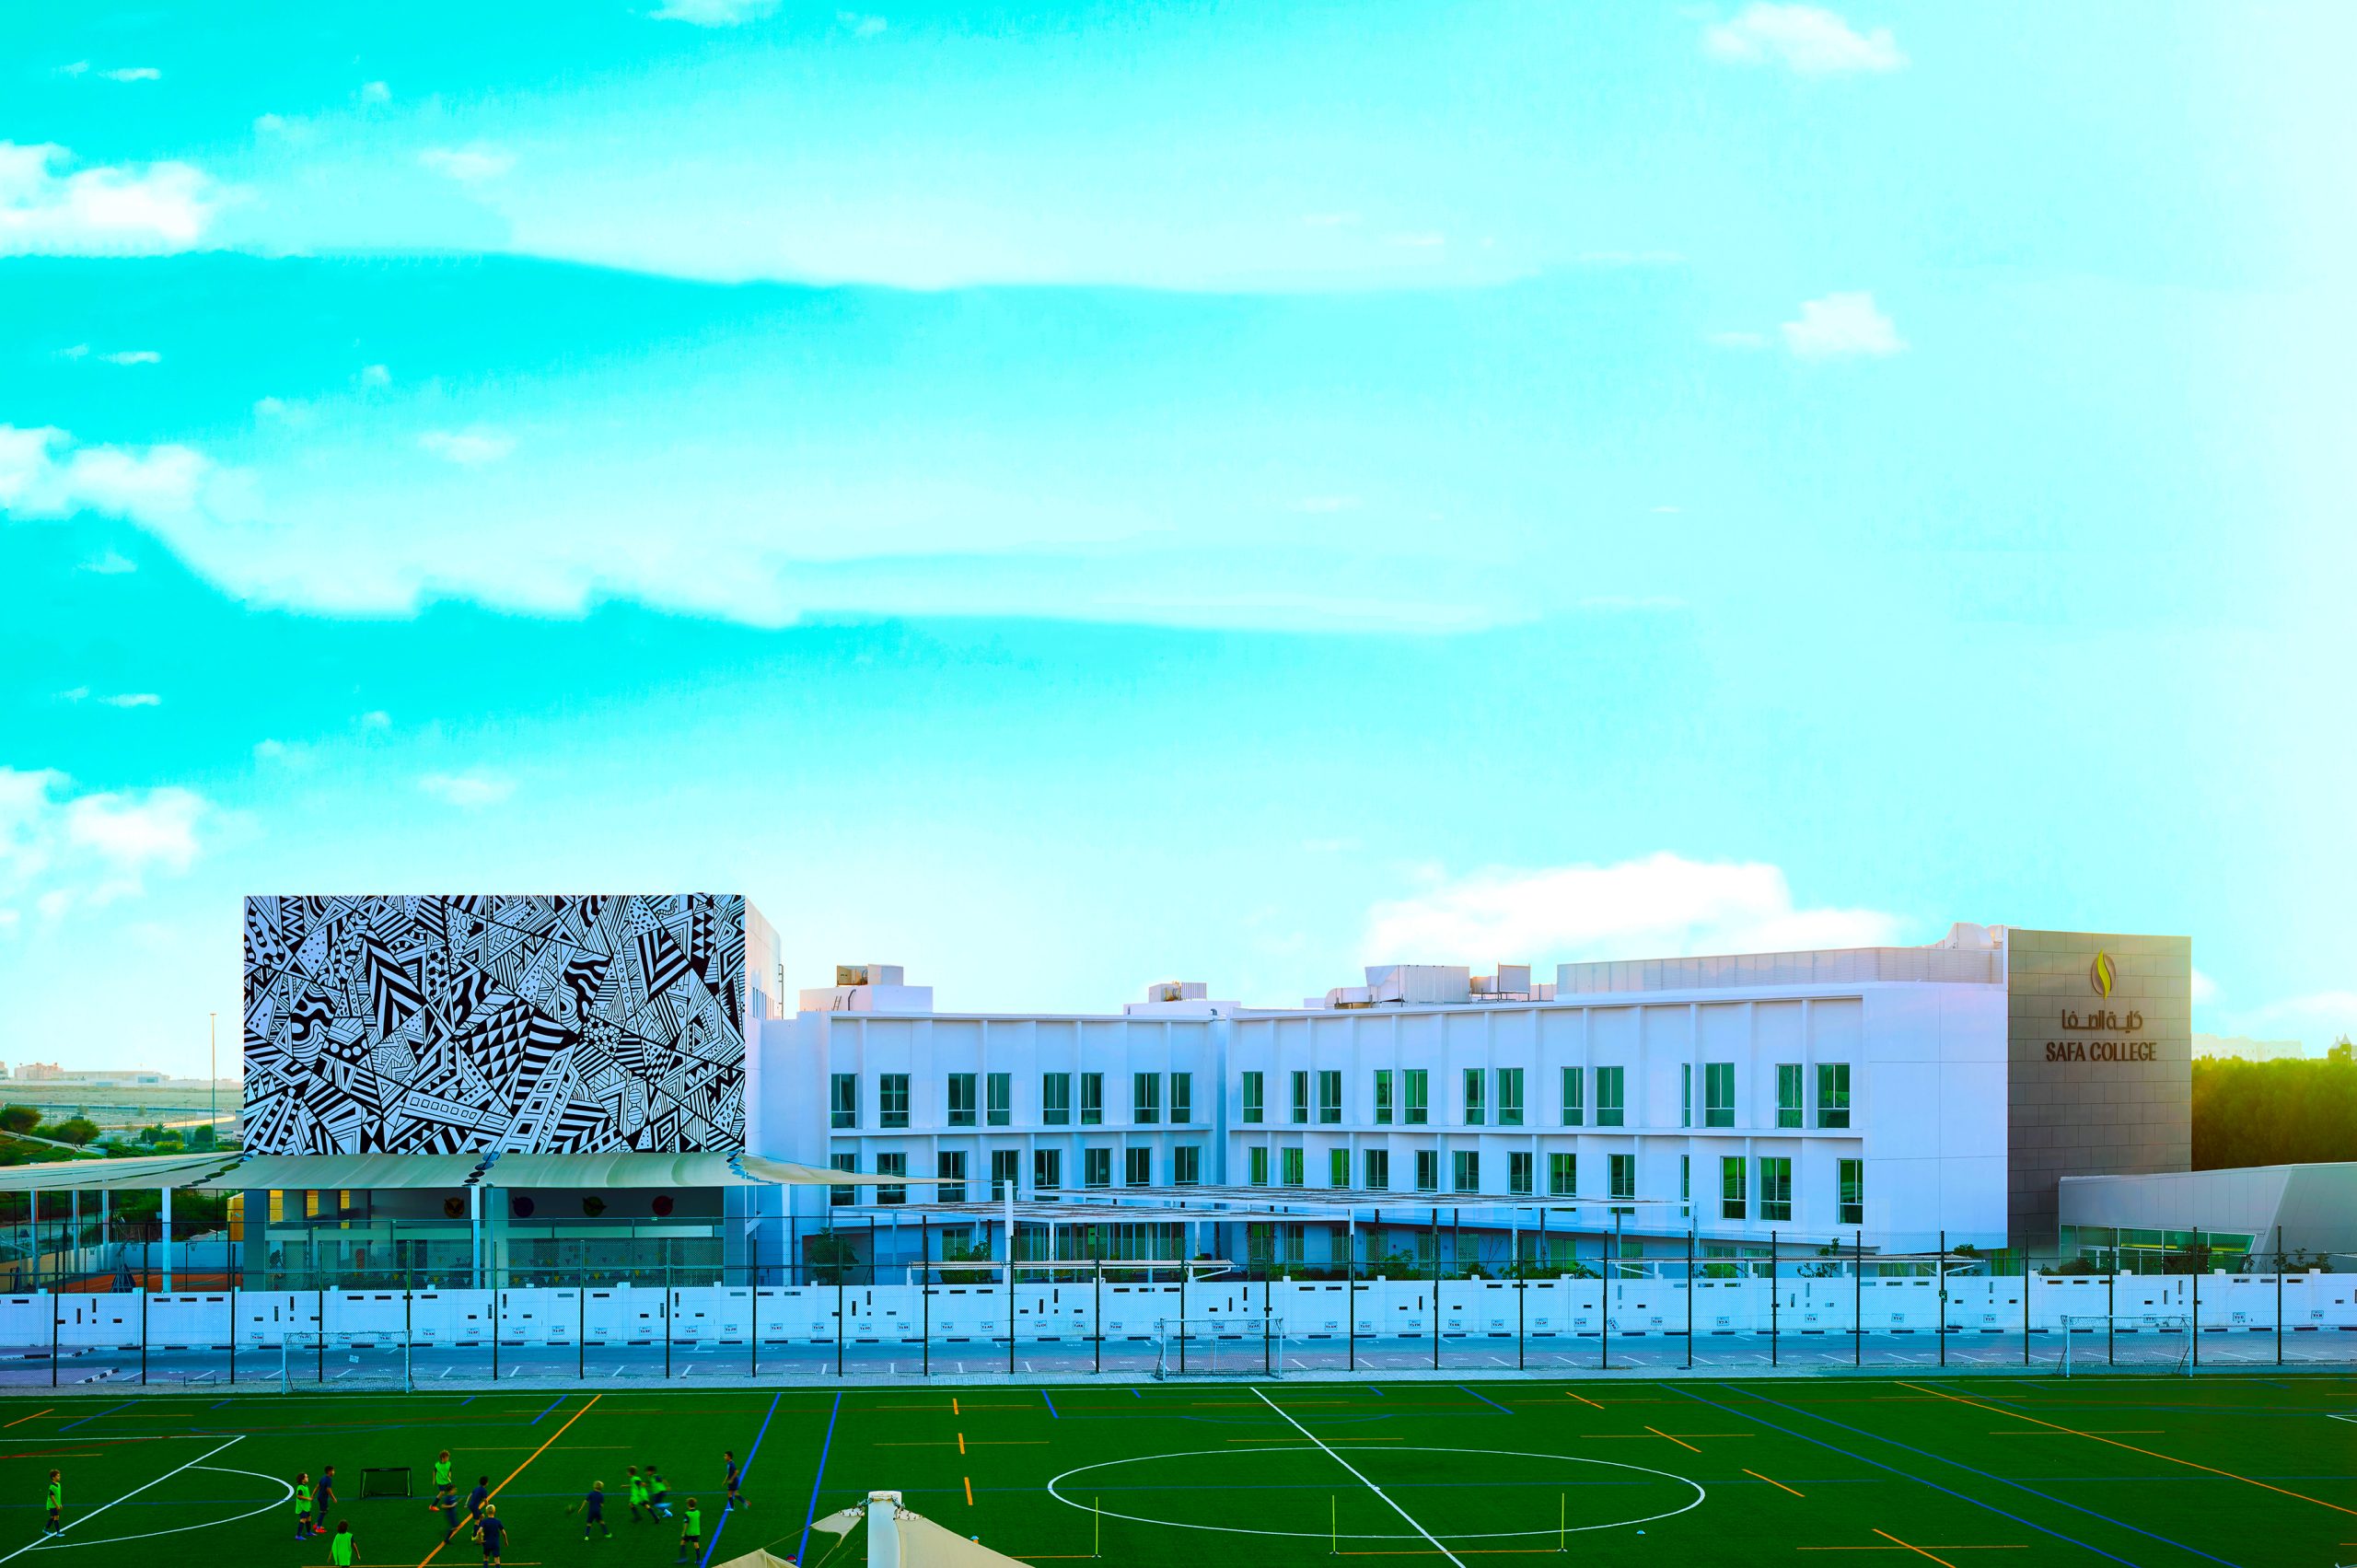 Photograph of Safa Community School highlighting the new Sixth Centre with Sports fields in the foreground.